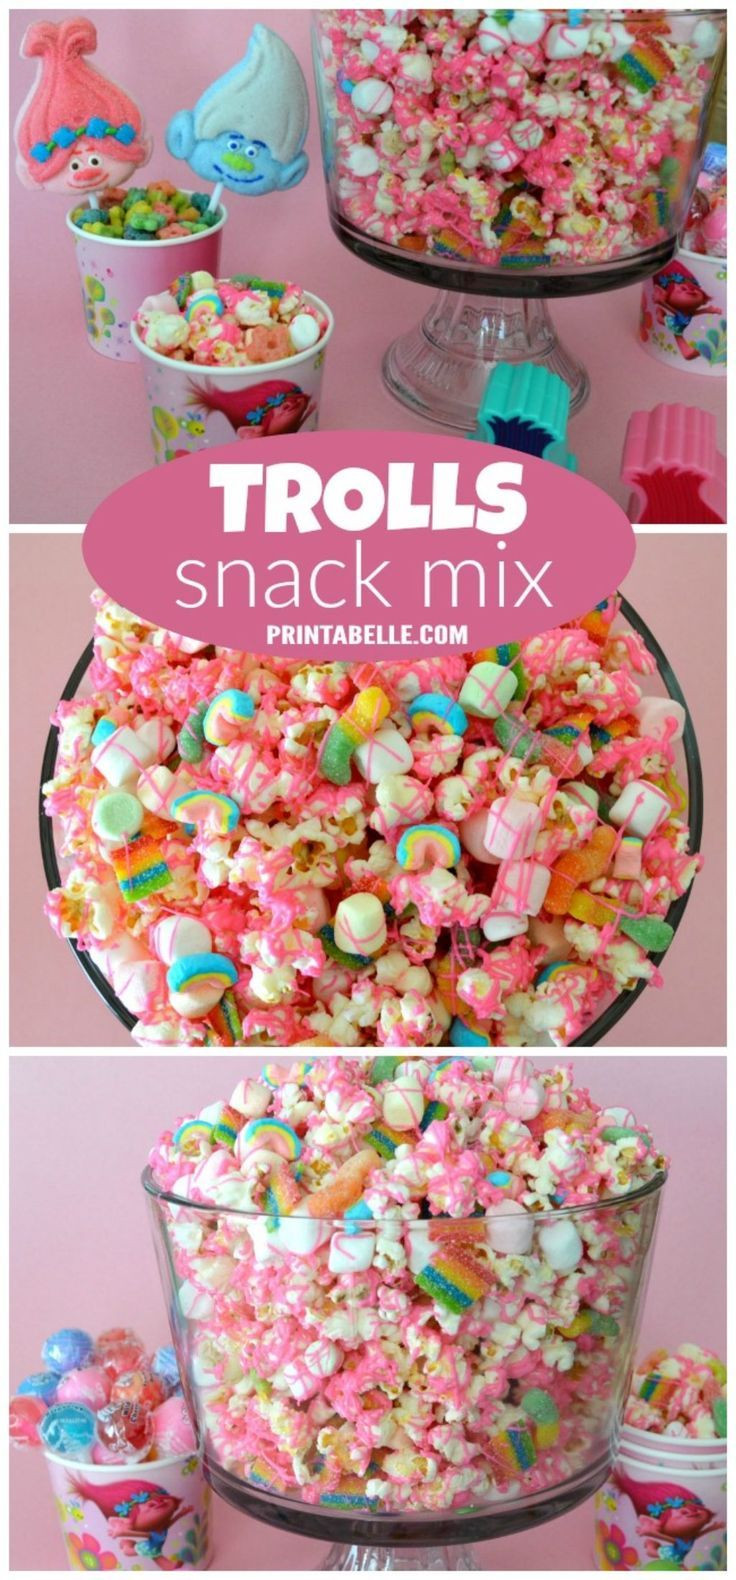 Trolls Birthday Party Ideas For Food
 33 best Trolls Party Ideas images on Pinterest